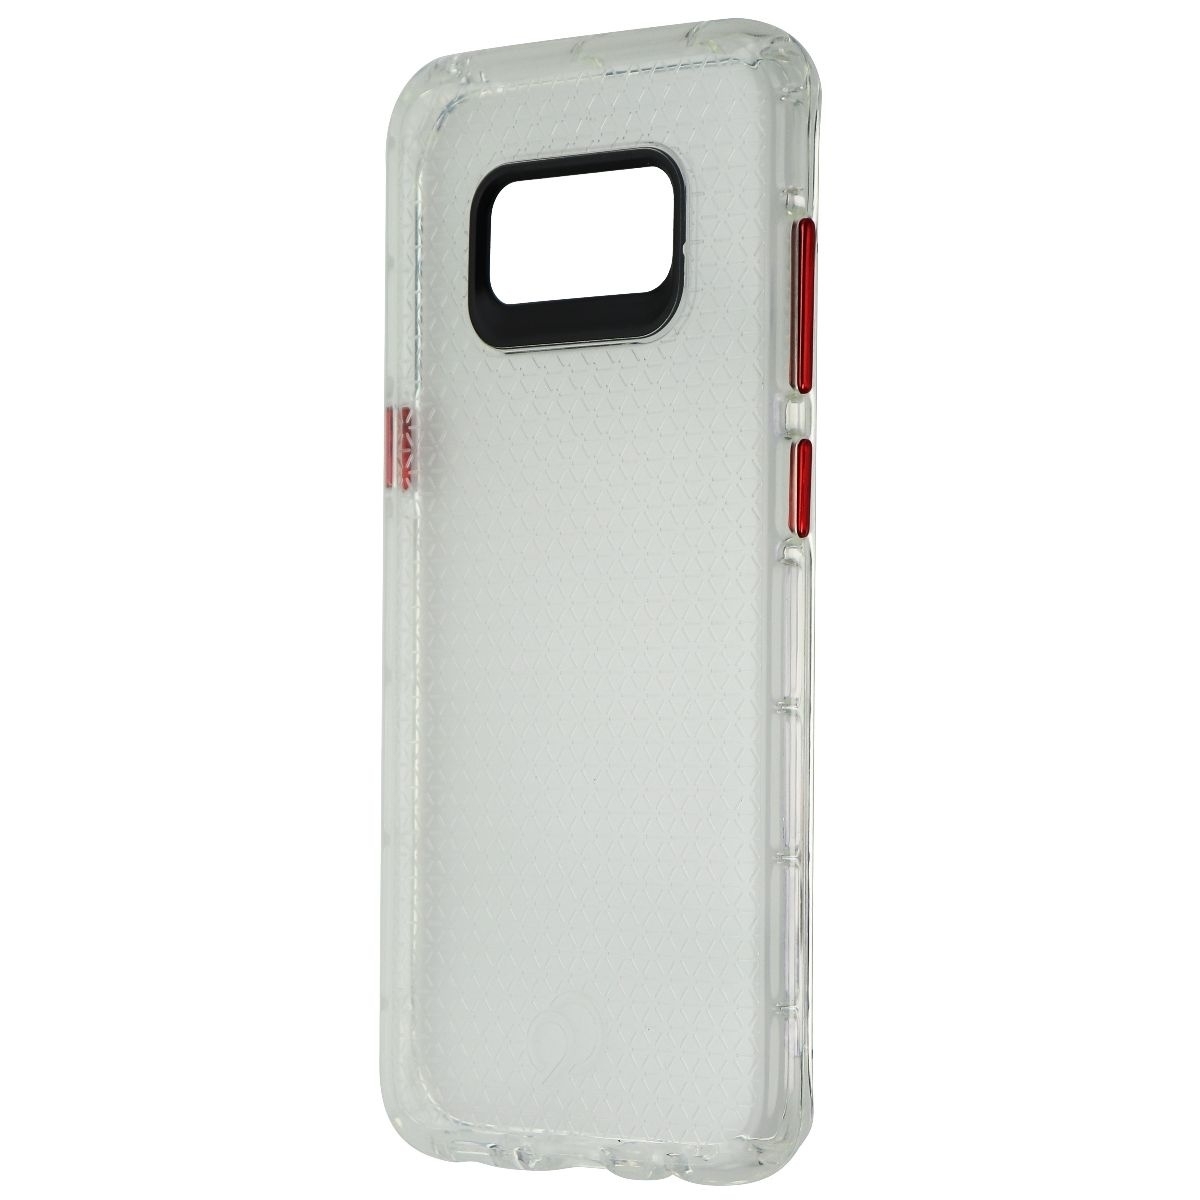 Nimbus9 Phantom 2 Series Case For Samsung Galaxy S8 - Clear (Red Buttons)